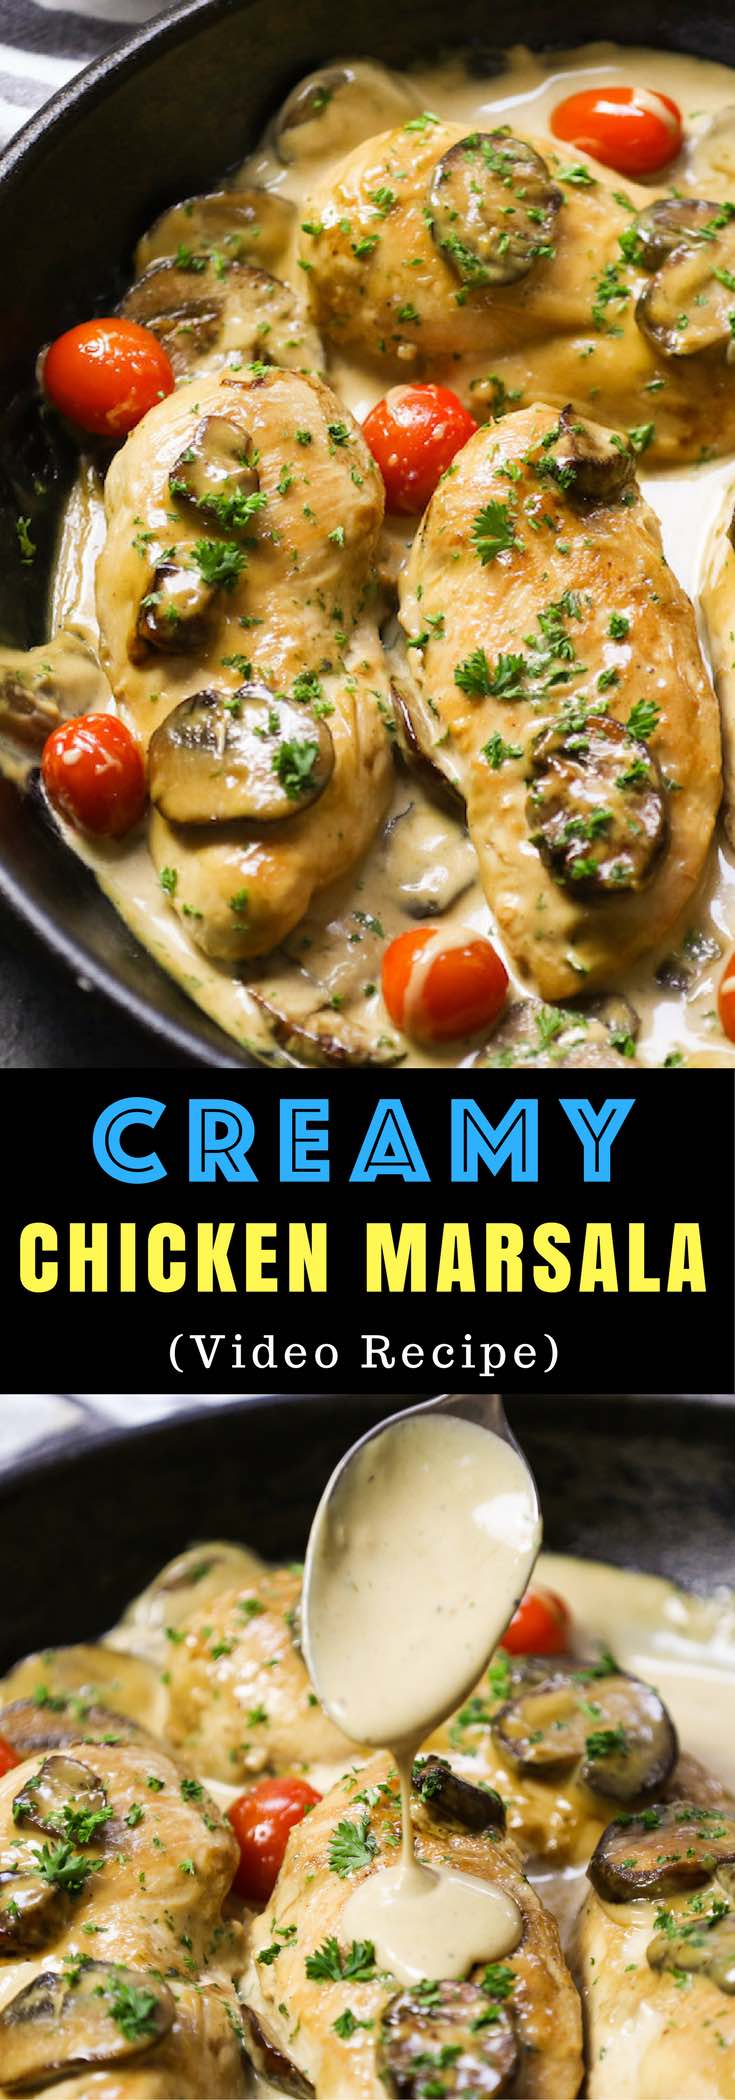 Creamy Chicken Marsala is a surprisingly easy weeknight dinner idea that will tantalize your taste buds with juicy chicken breasts in a creamy mushroom sauce flavored with marsala wine. And it's ready in under 30 minutes. Plus video tutorial!